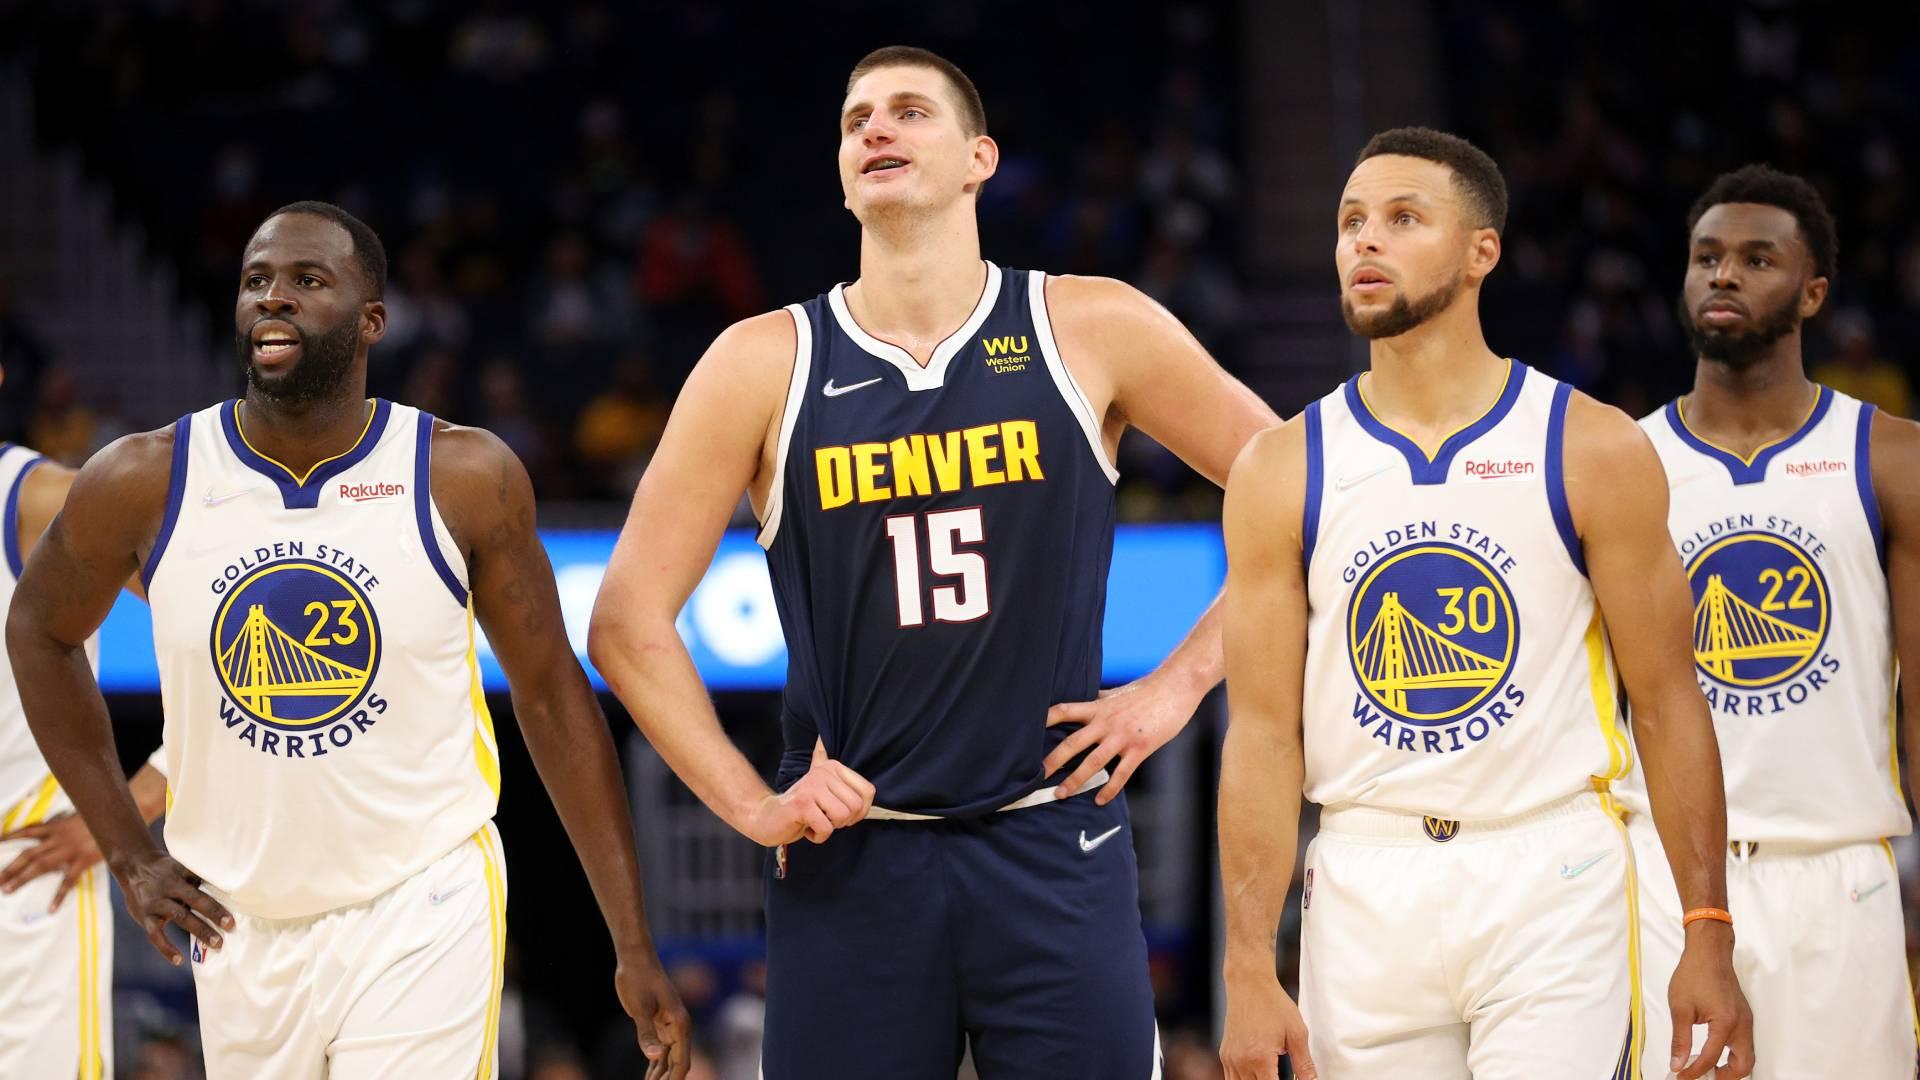 Warriors vs. Nuggets: Predictions, odds, schedule, TV channels, live streams for 1st Round in 2022 NBA Playoffs